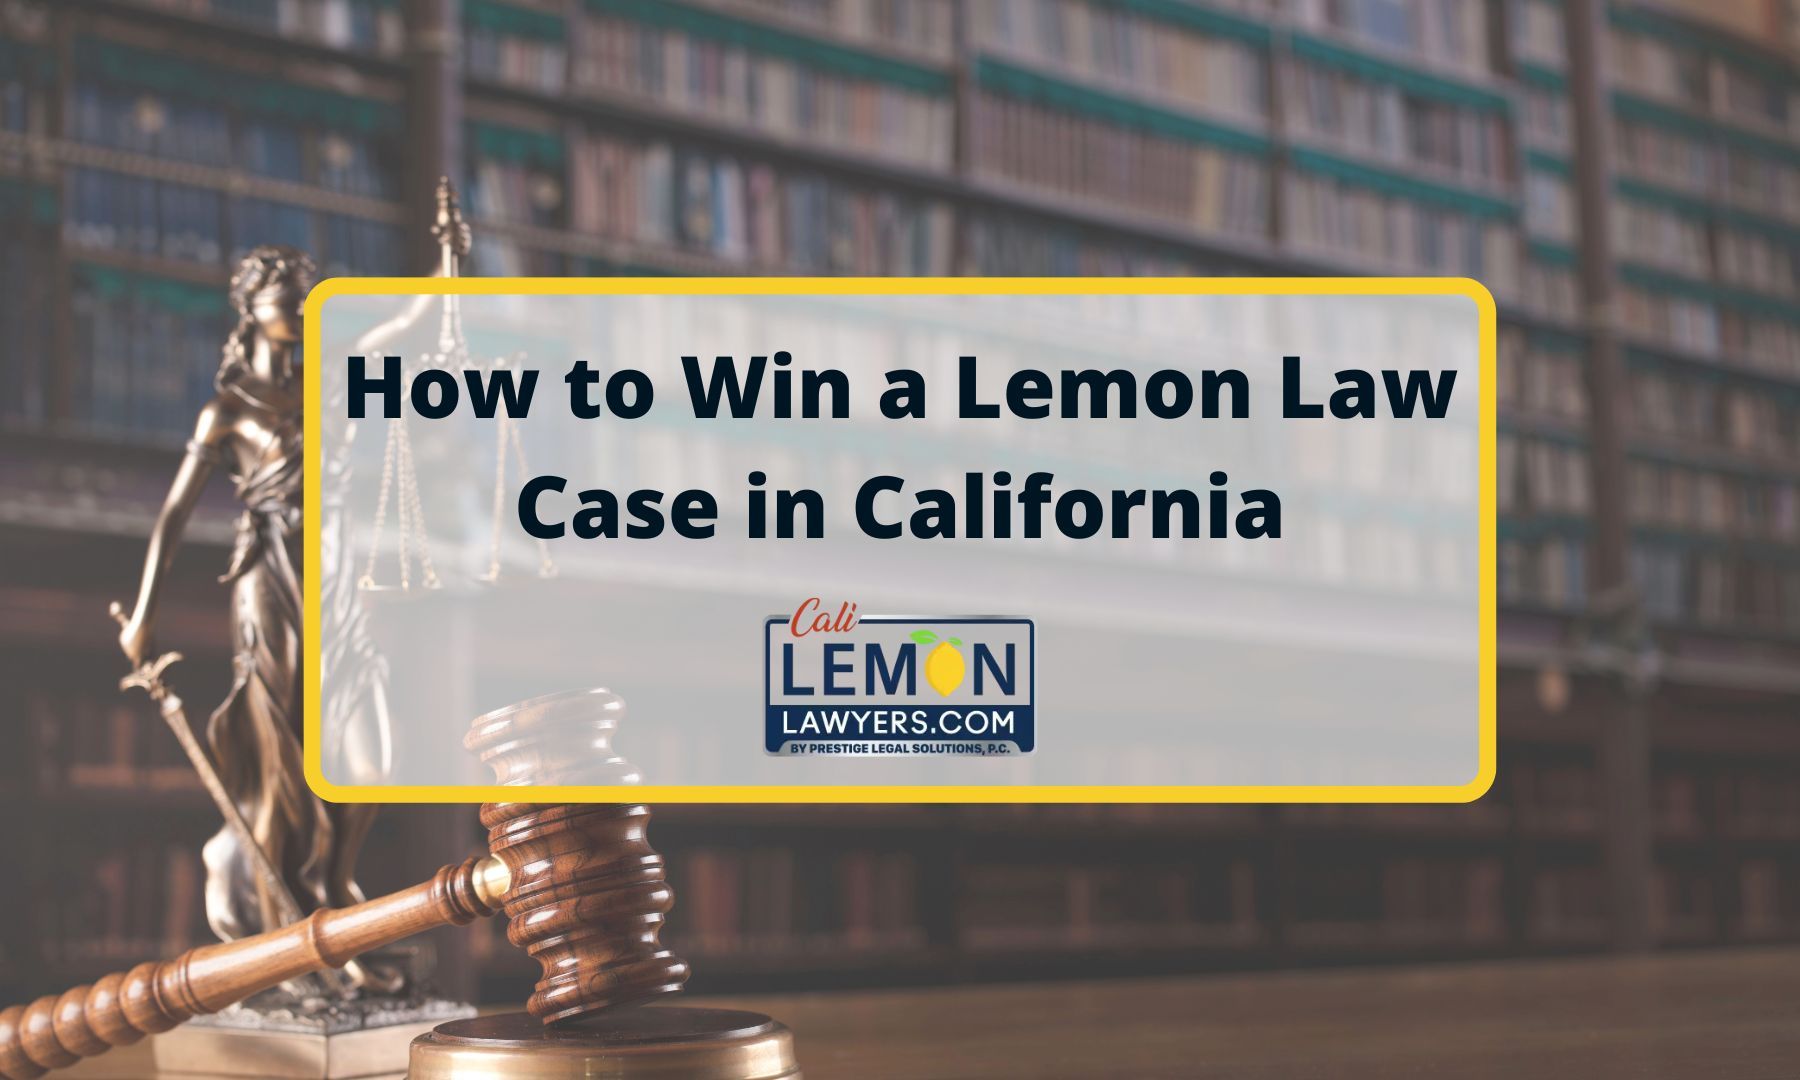 How to Win a Lemon Law Case in California